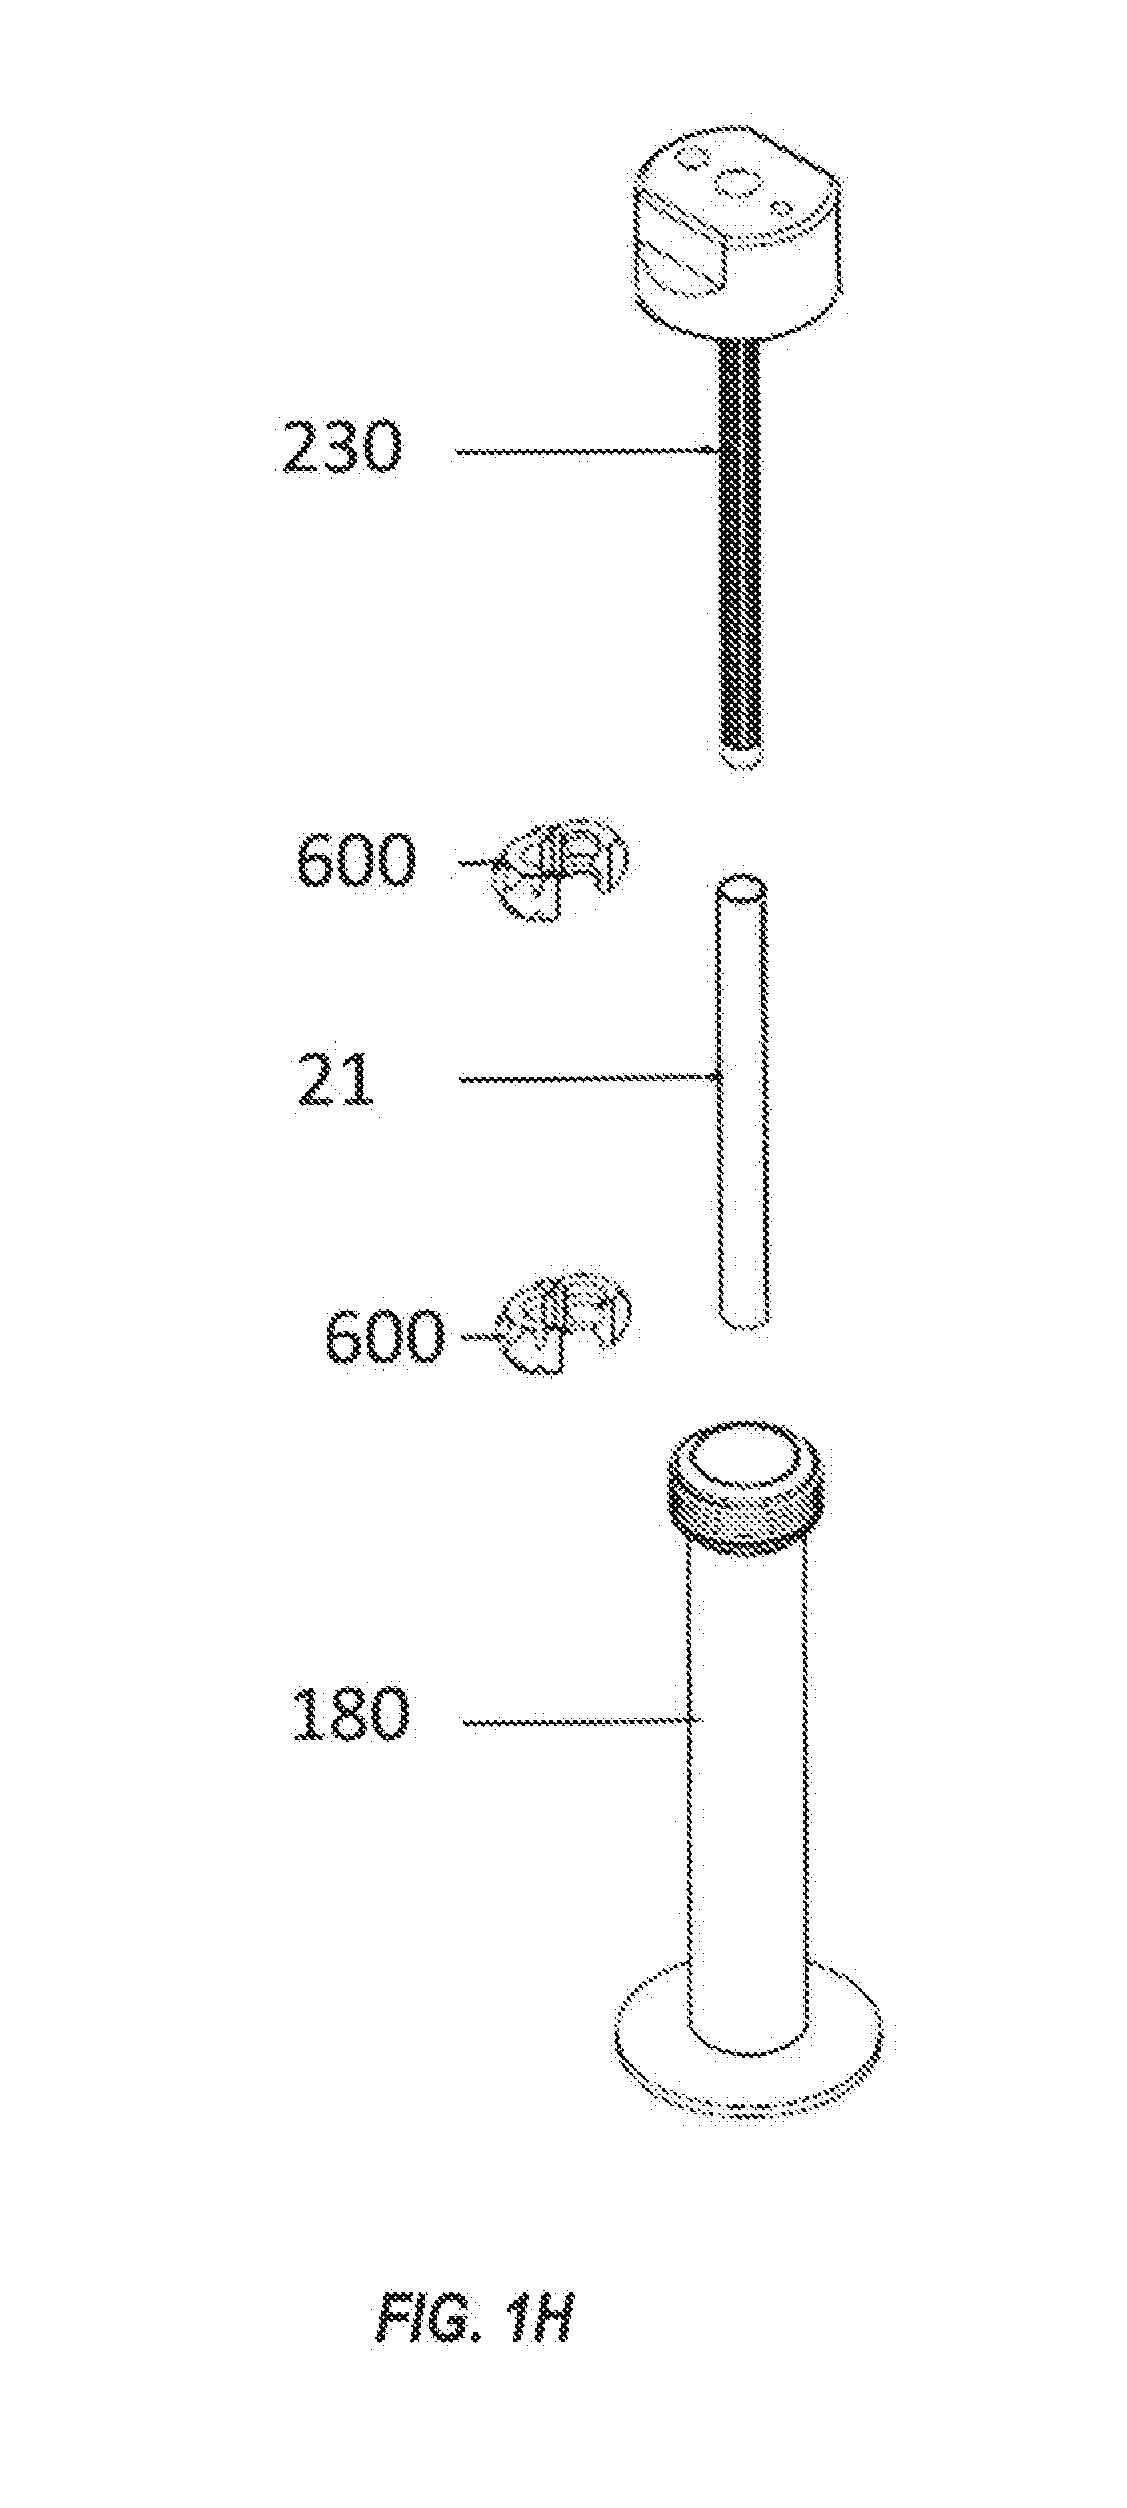 Systems and methods for optimized patient specific tissue engineering vascular grafts